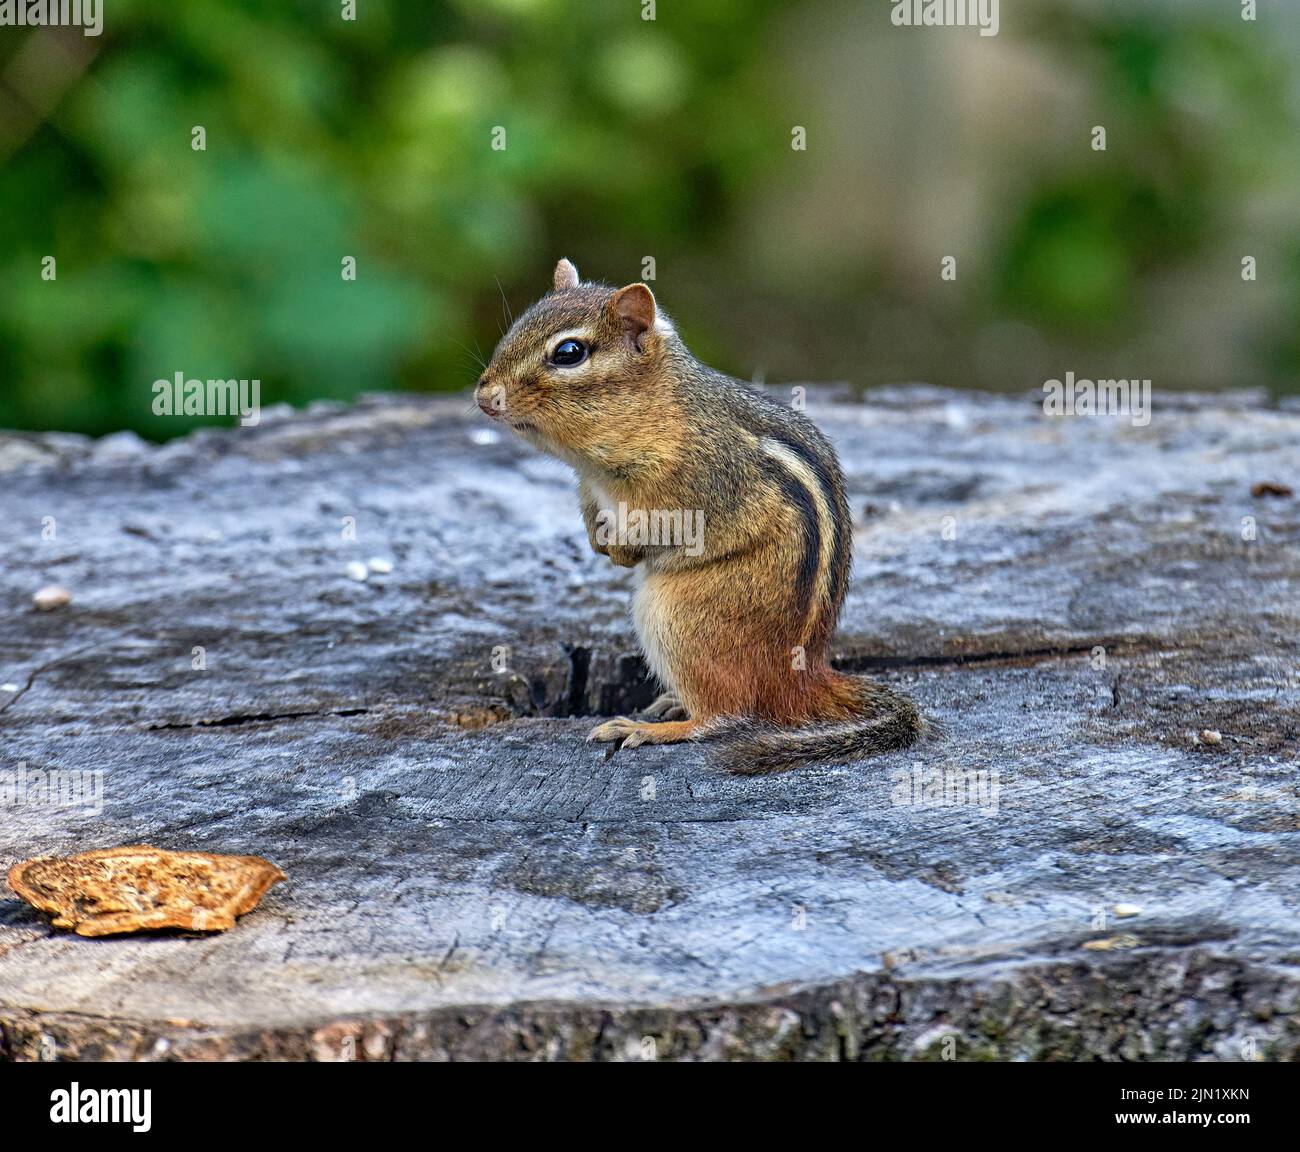 Eastern chipmunk, the largest of the chipmunks. Seen here sitting up on a stump. Stock Photo